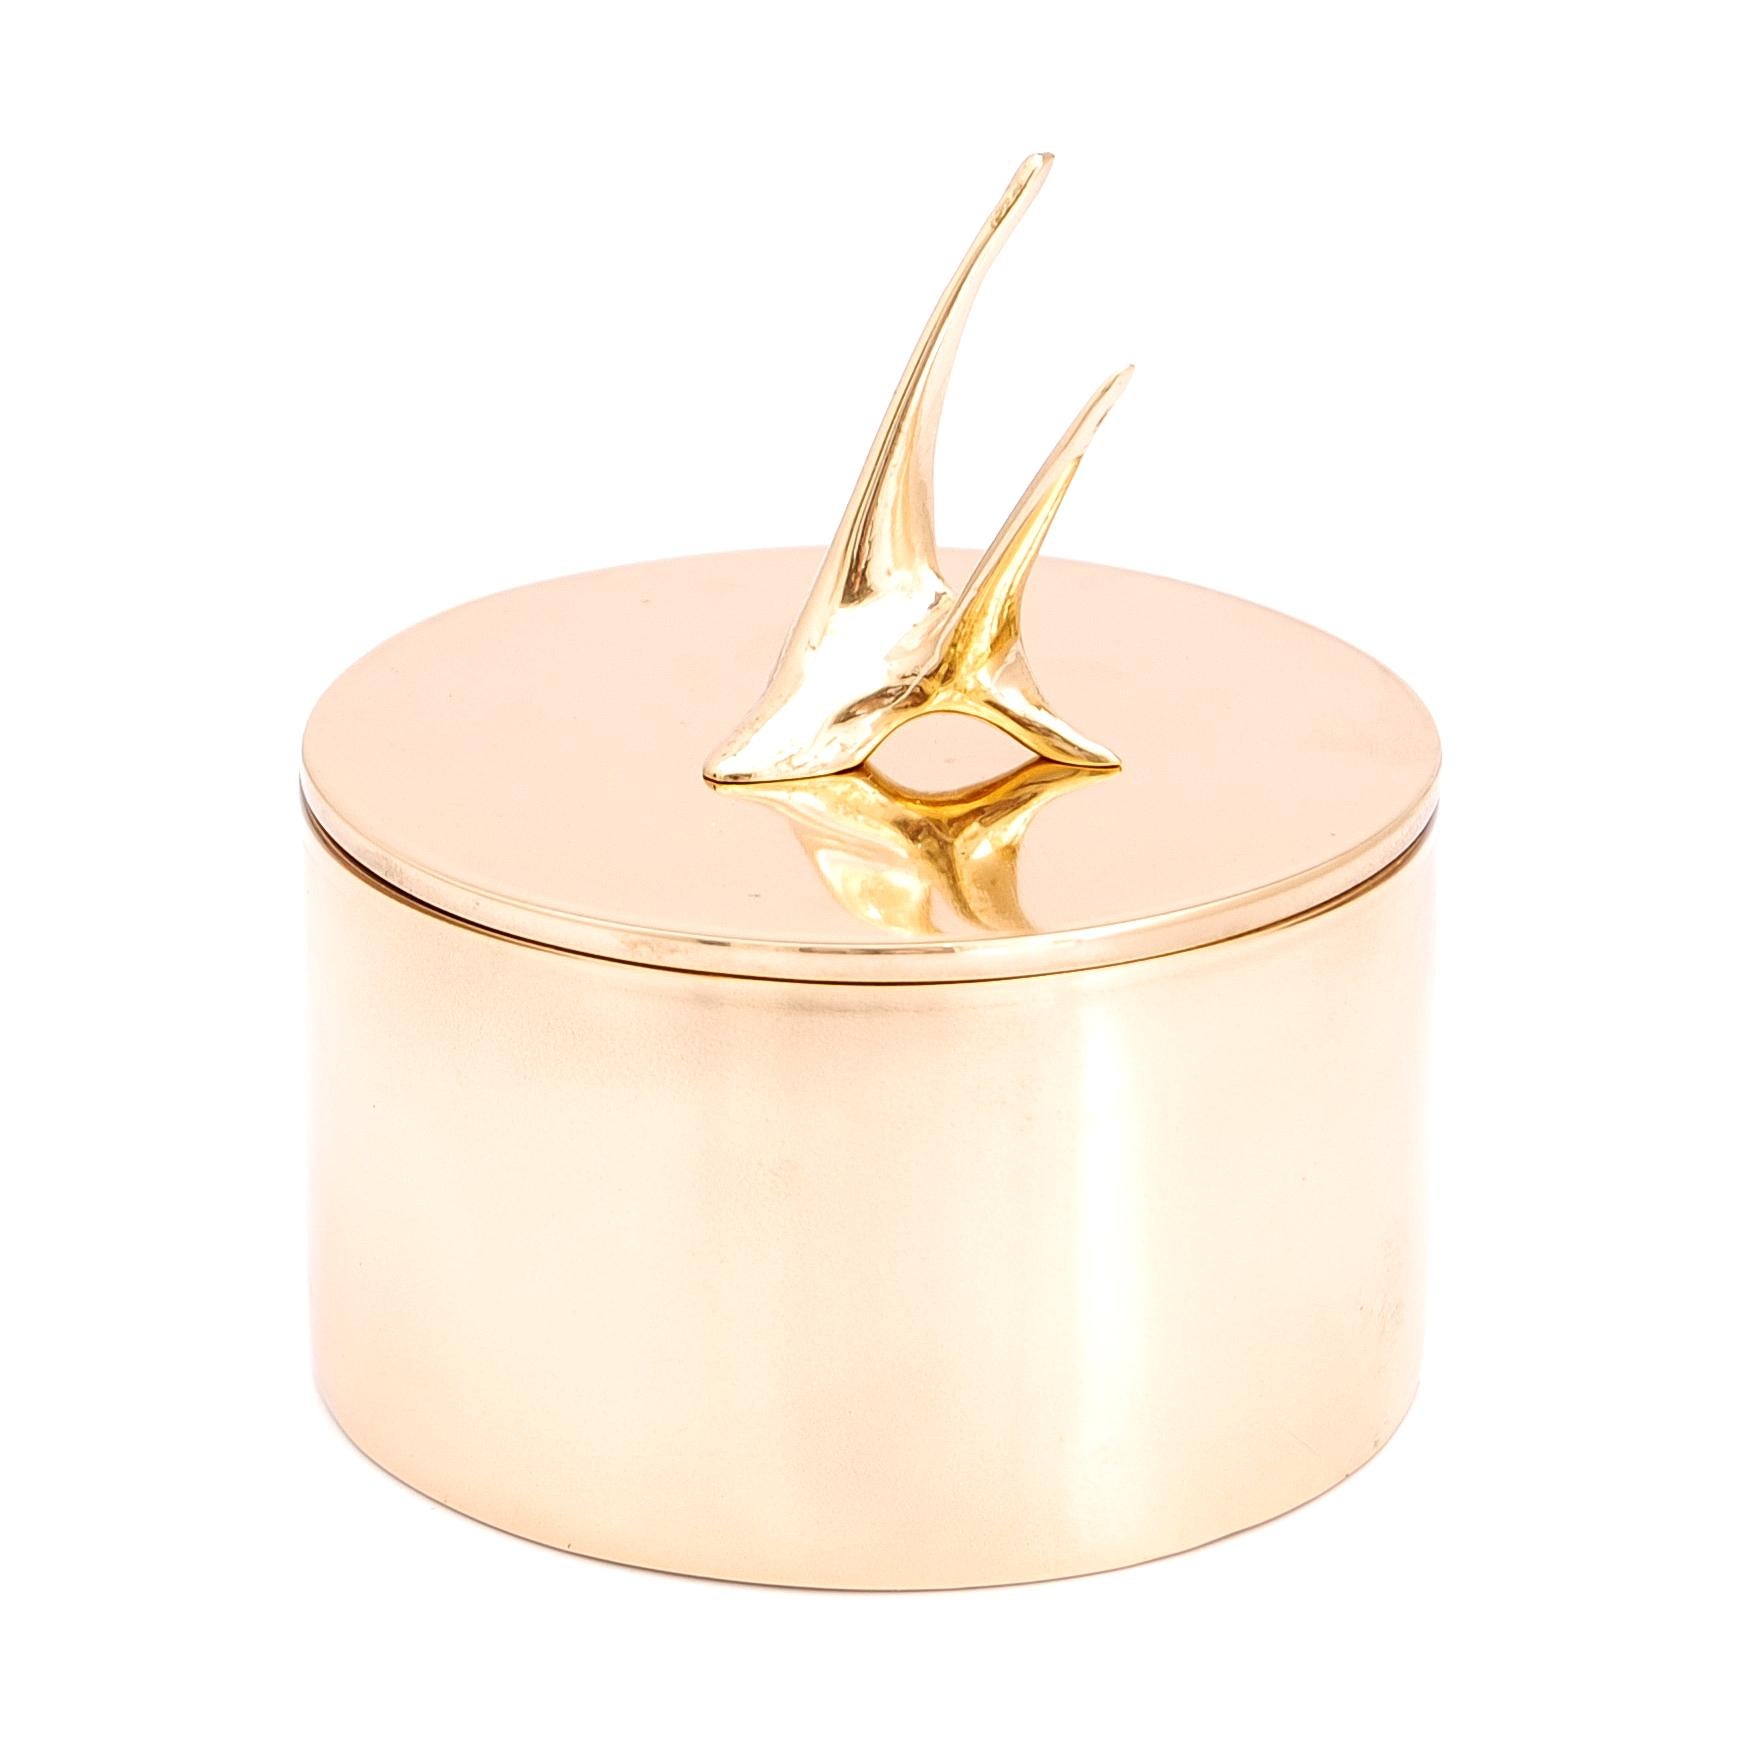 Florence box by Fakasaka Design
Dimensions: W 10 cm D 10 cm H 9 cm.
Materials: polished bronze.

 FAKASAKA is a design company focused on production of high-end furniture, lighting, decorative objects, jewels, and accessories.

 Established in 2007,